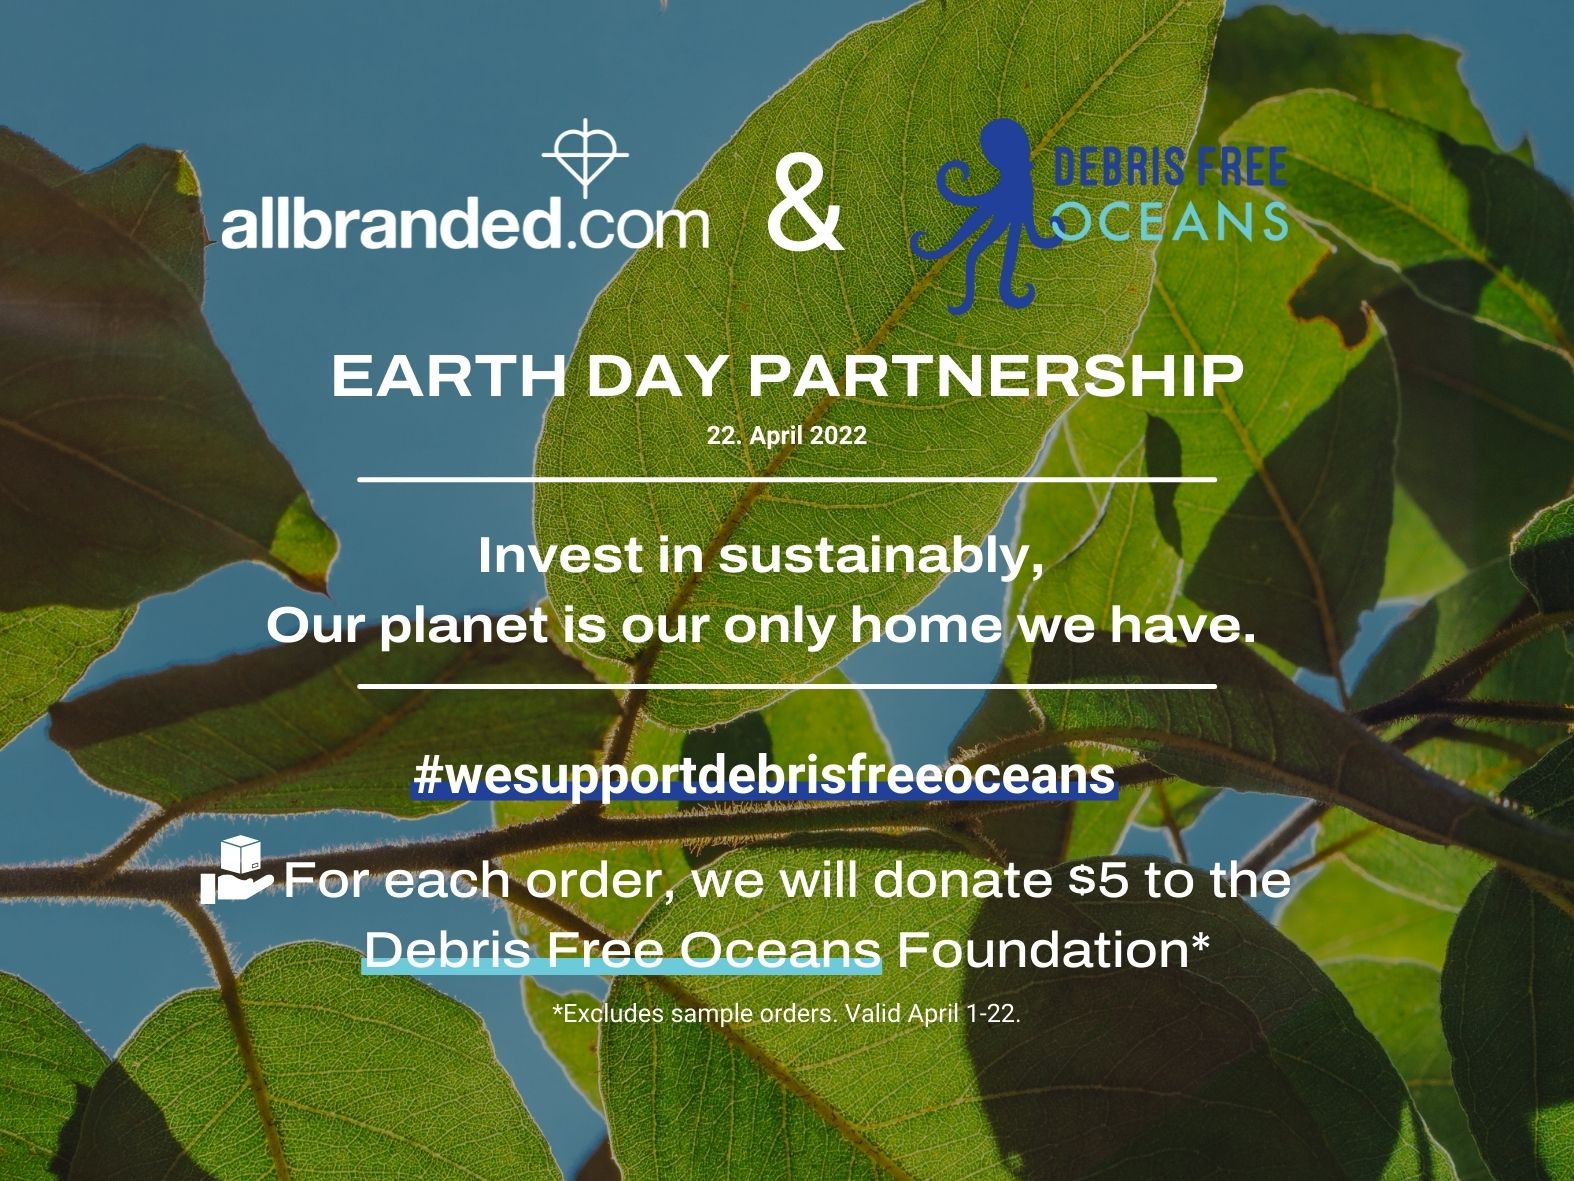 allbranded.com Partners with Debris Free Oceans for Earth Day